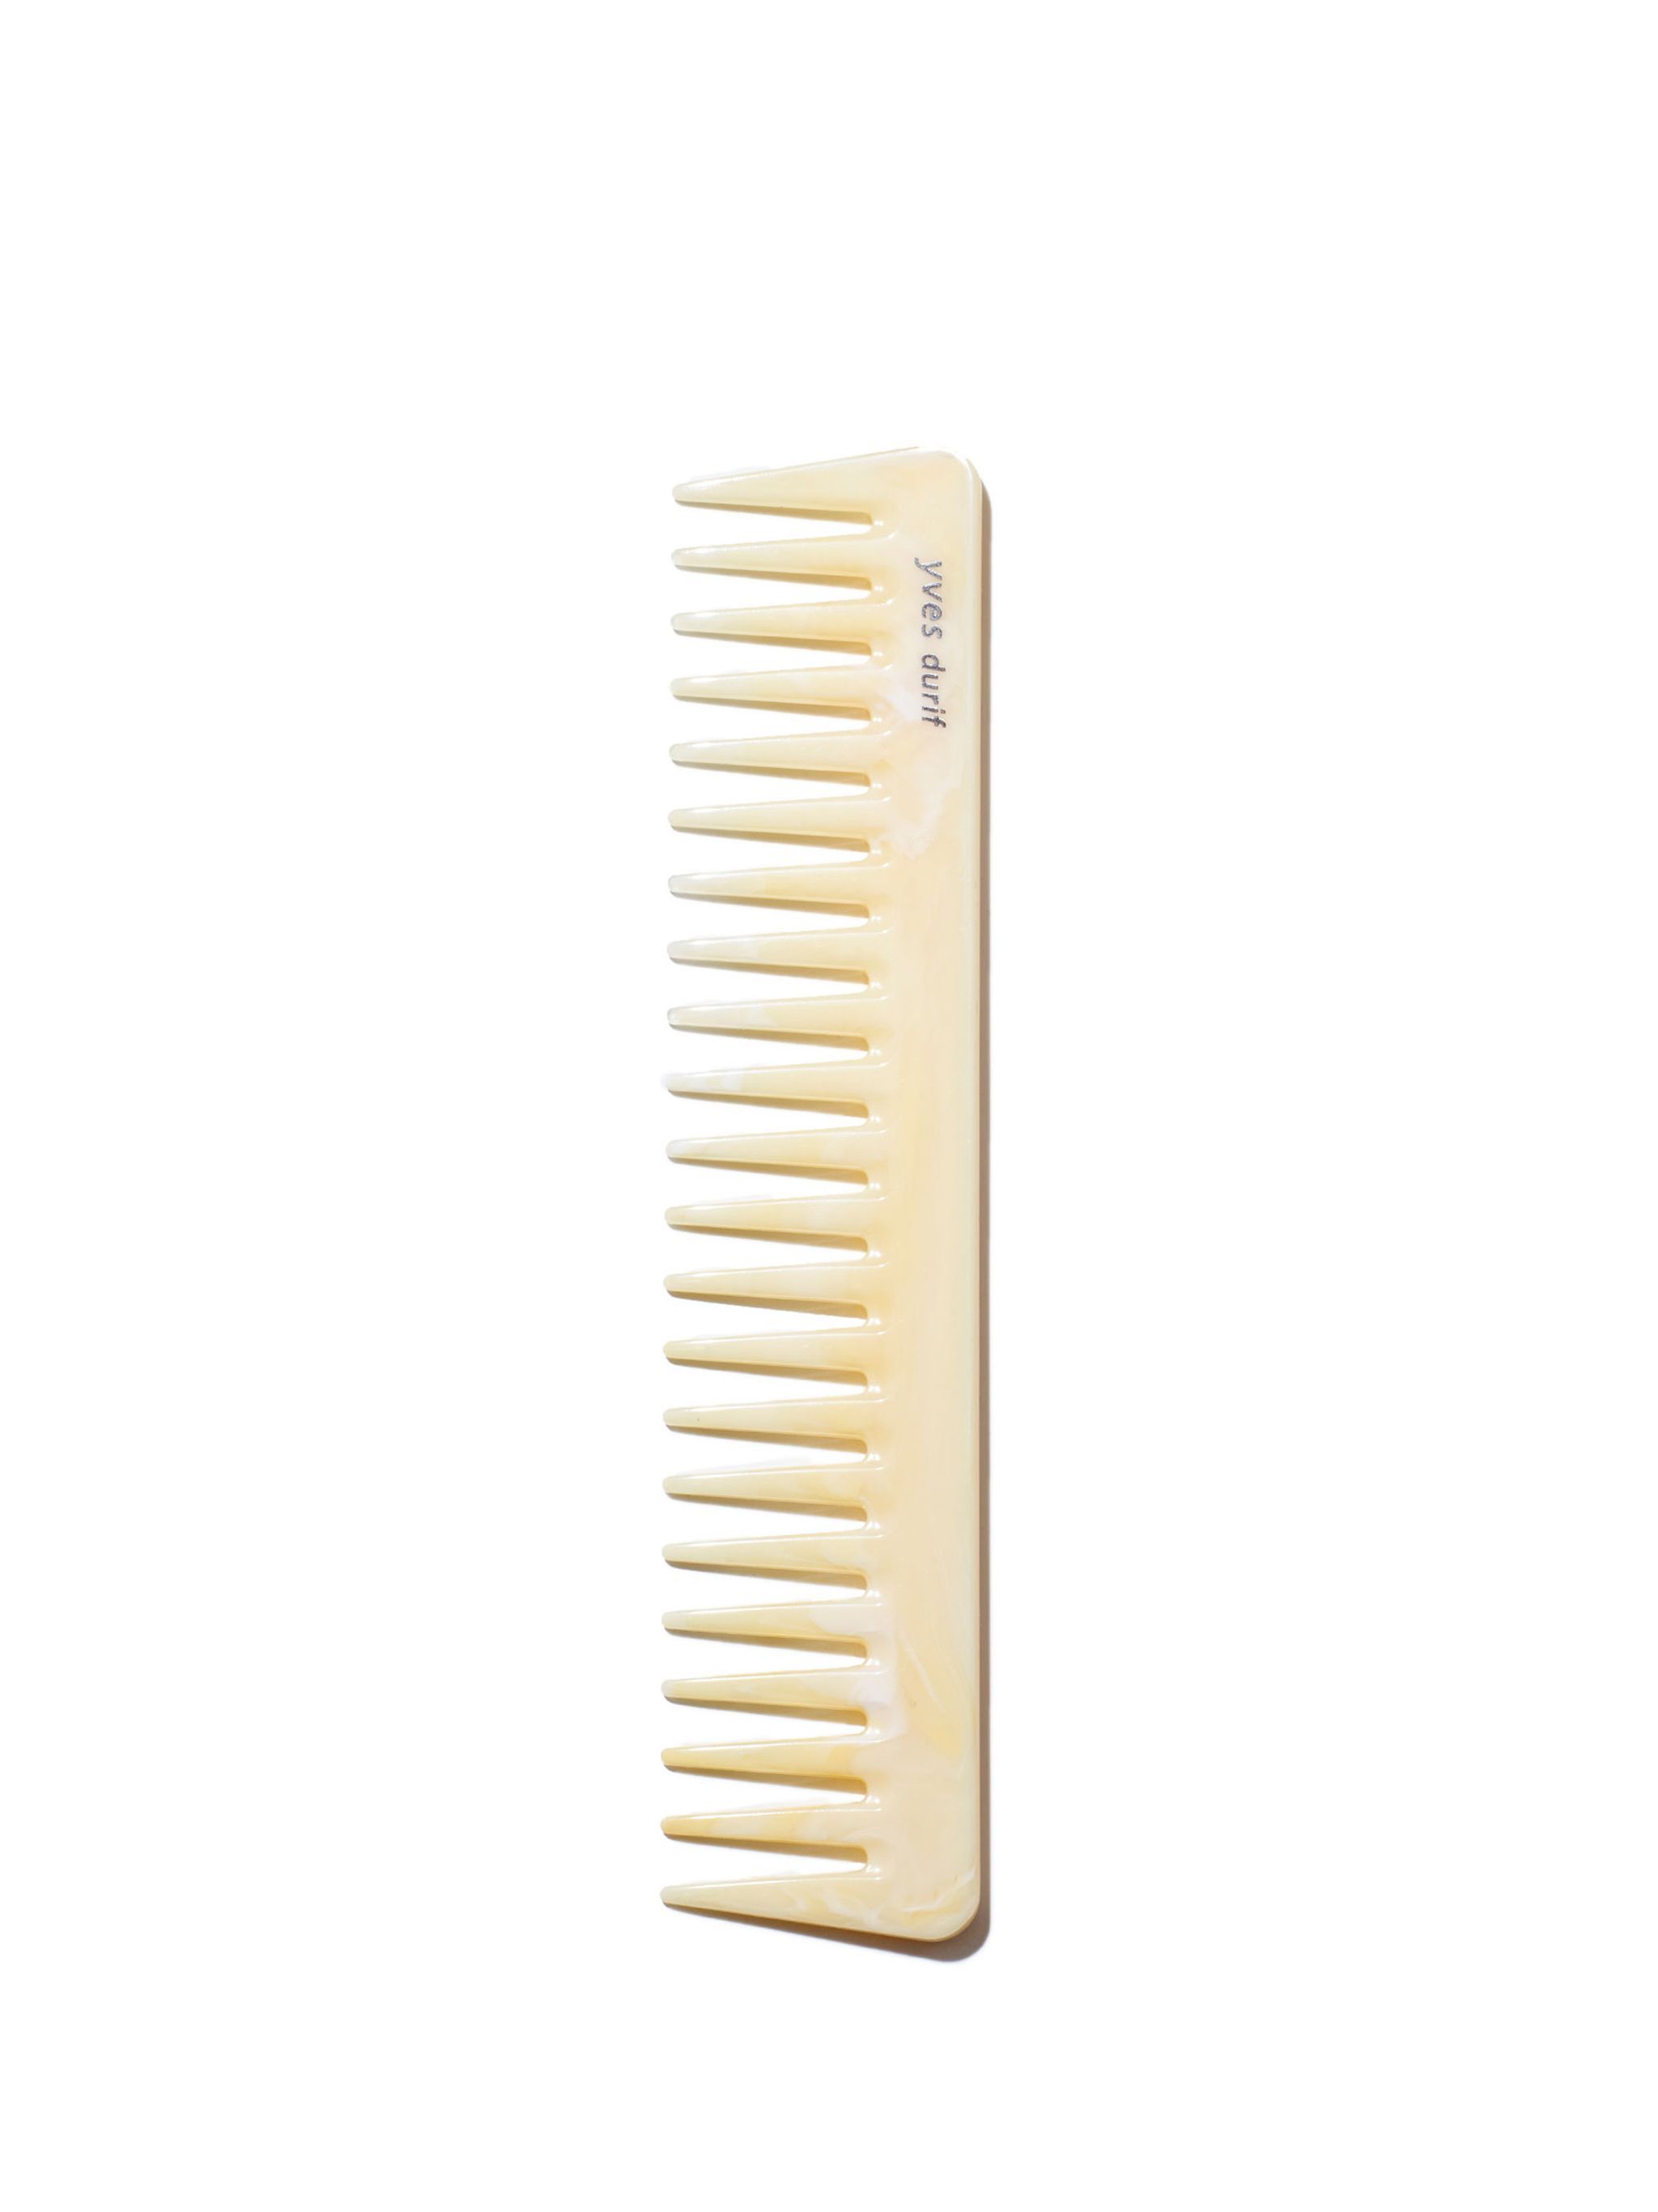 The Yves Durif Comb | Violet Grey